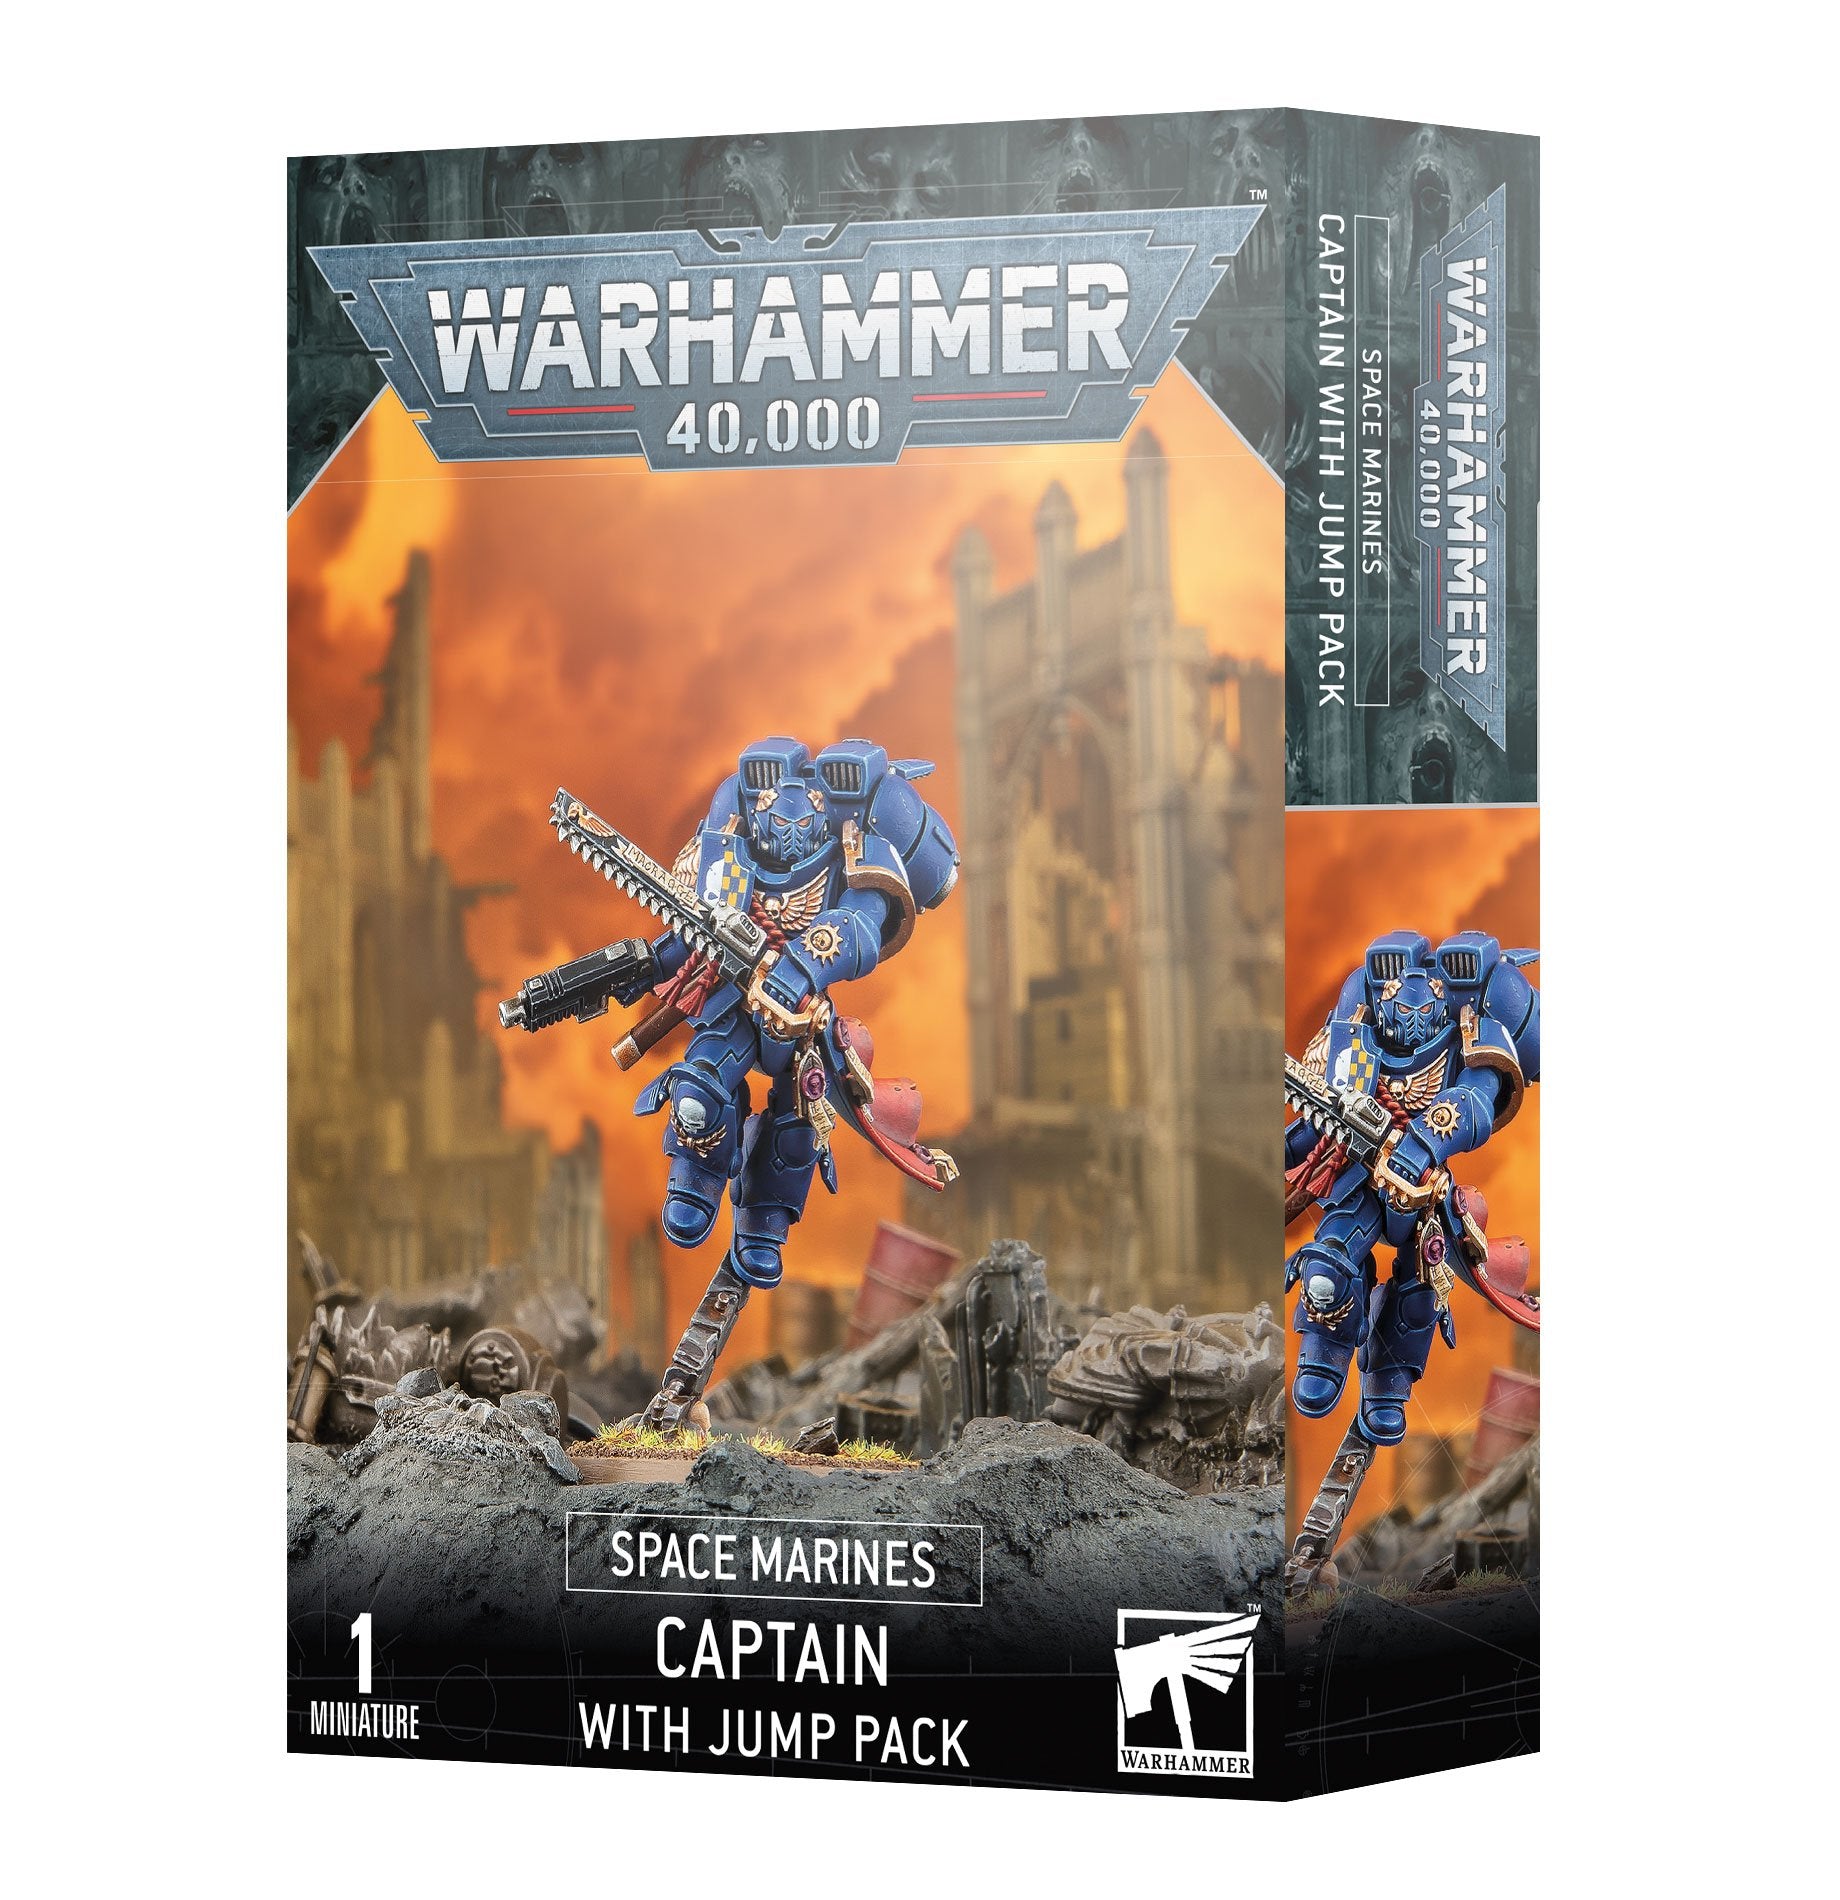 Space Marines: Captain With Jump Pack - Release Date 14/10/23 - Loaded Dice Barry Vale of Glamorgan CF64 3HD